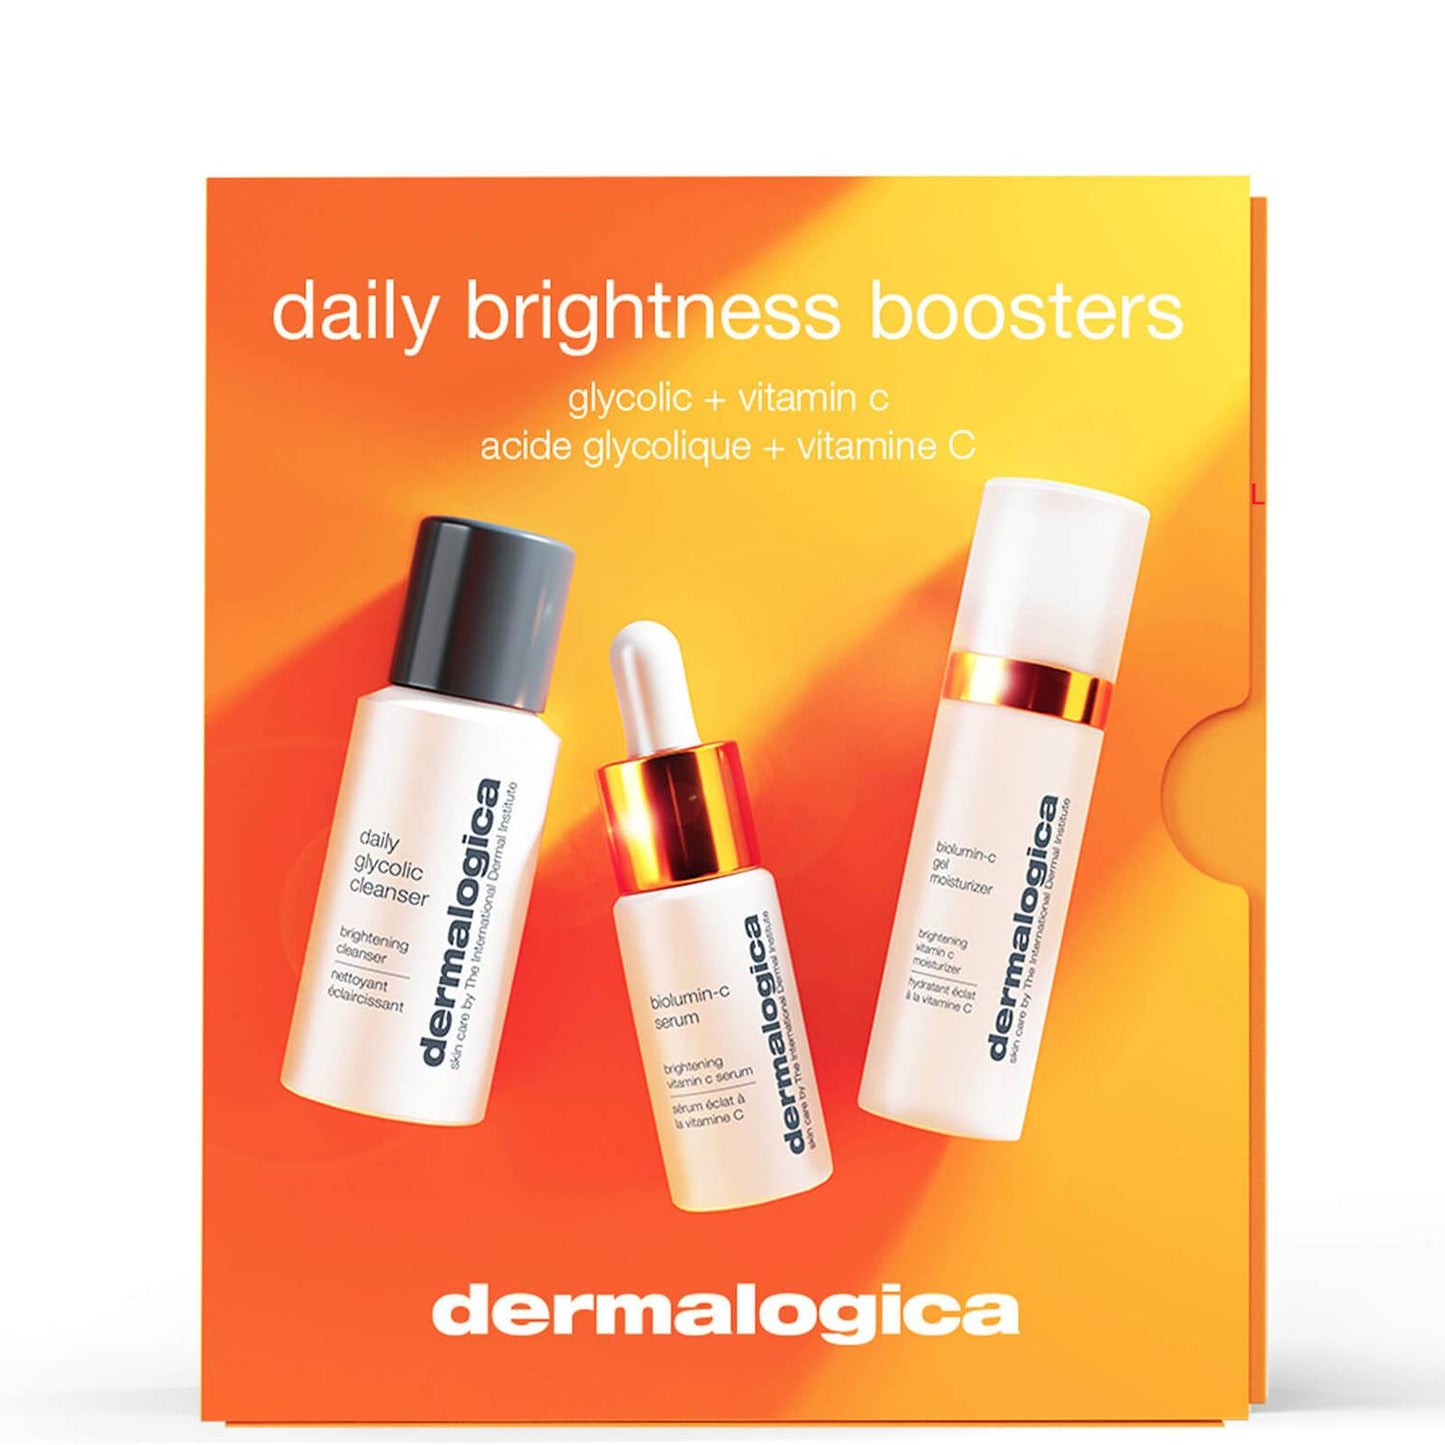 Dermalogica Kit - Daily Brightness Boosters